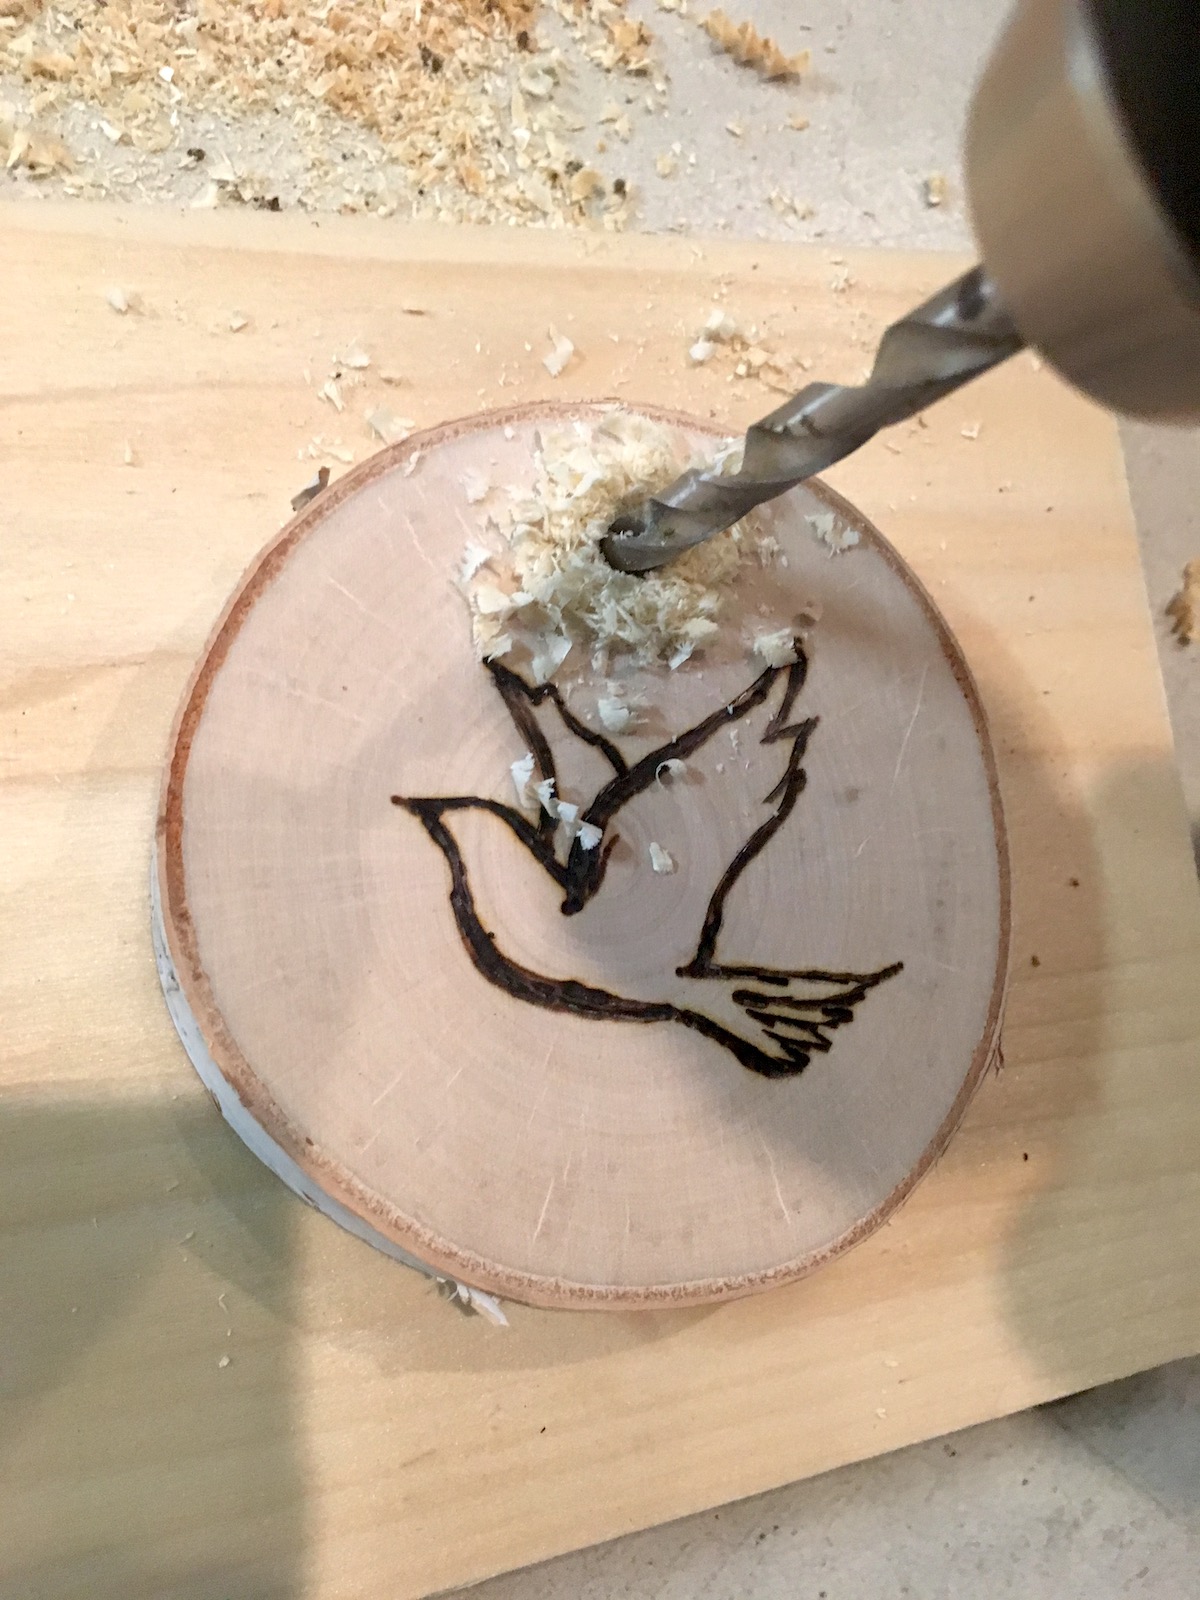 Drilling into a wood slice ornament with a drill